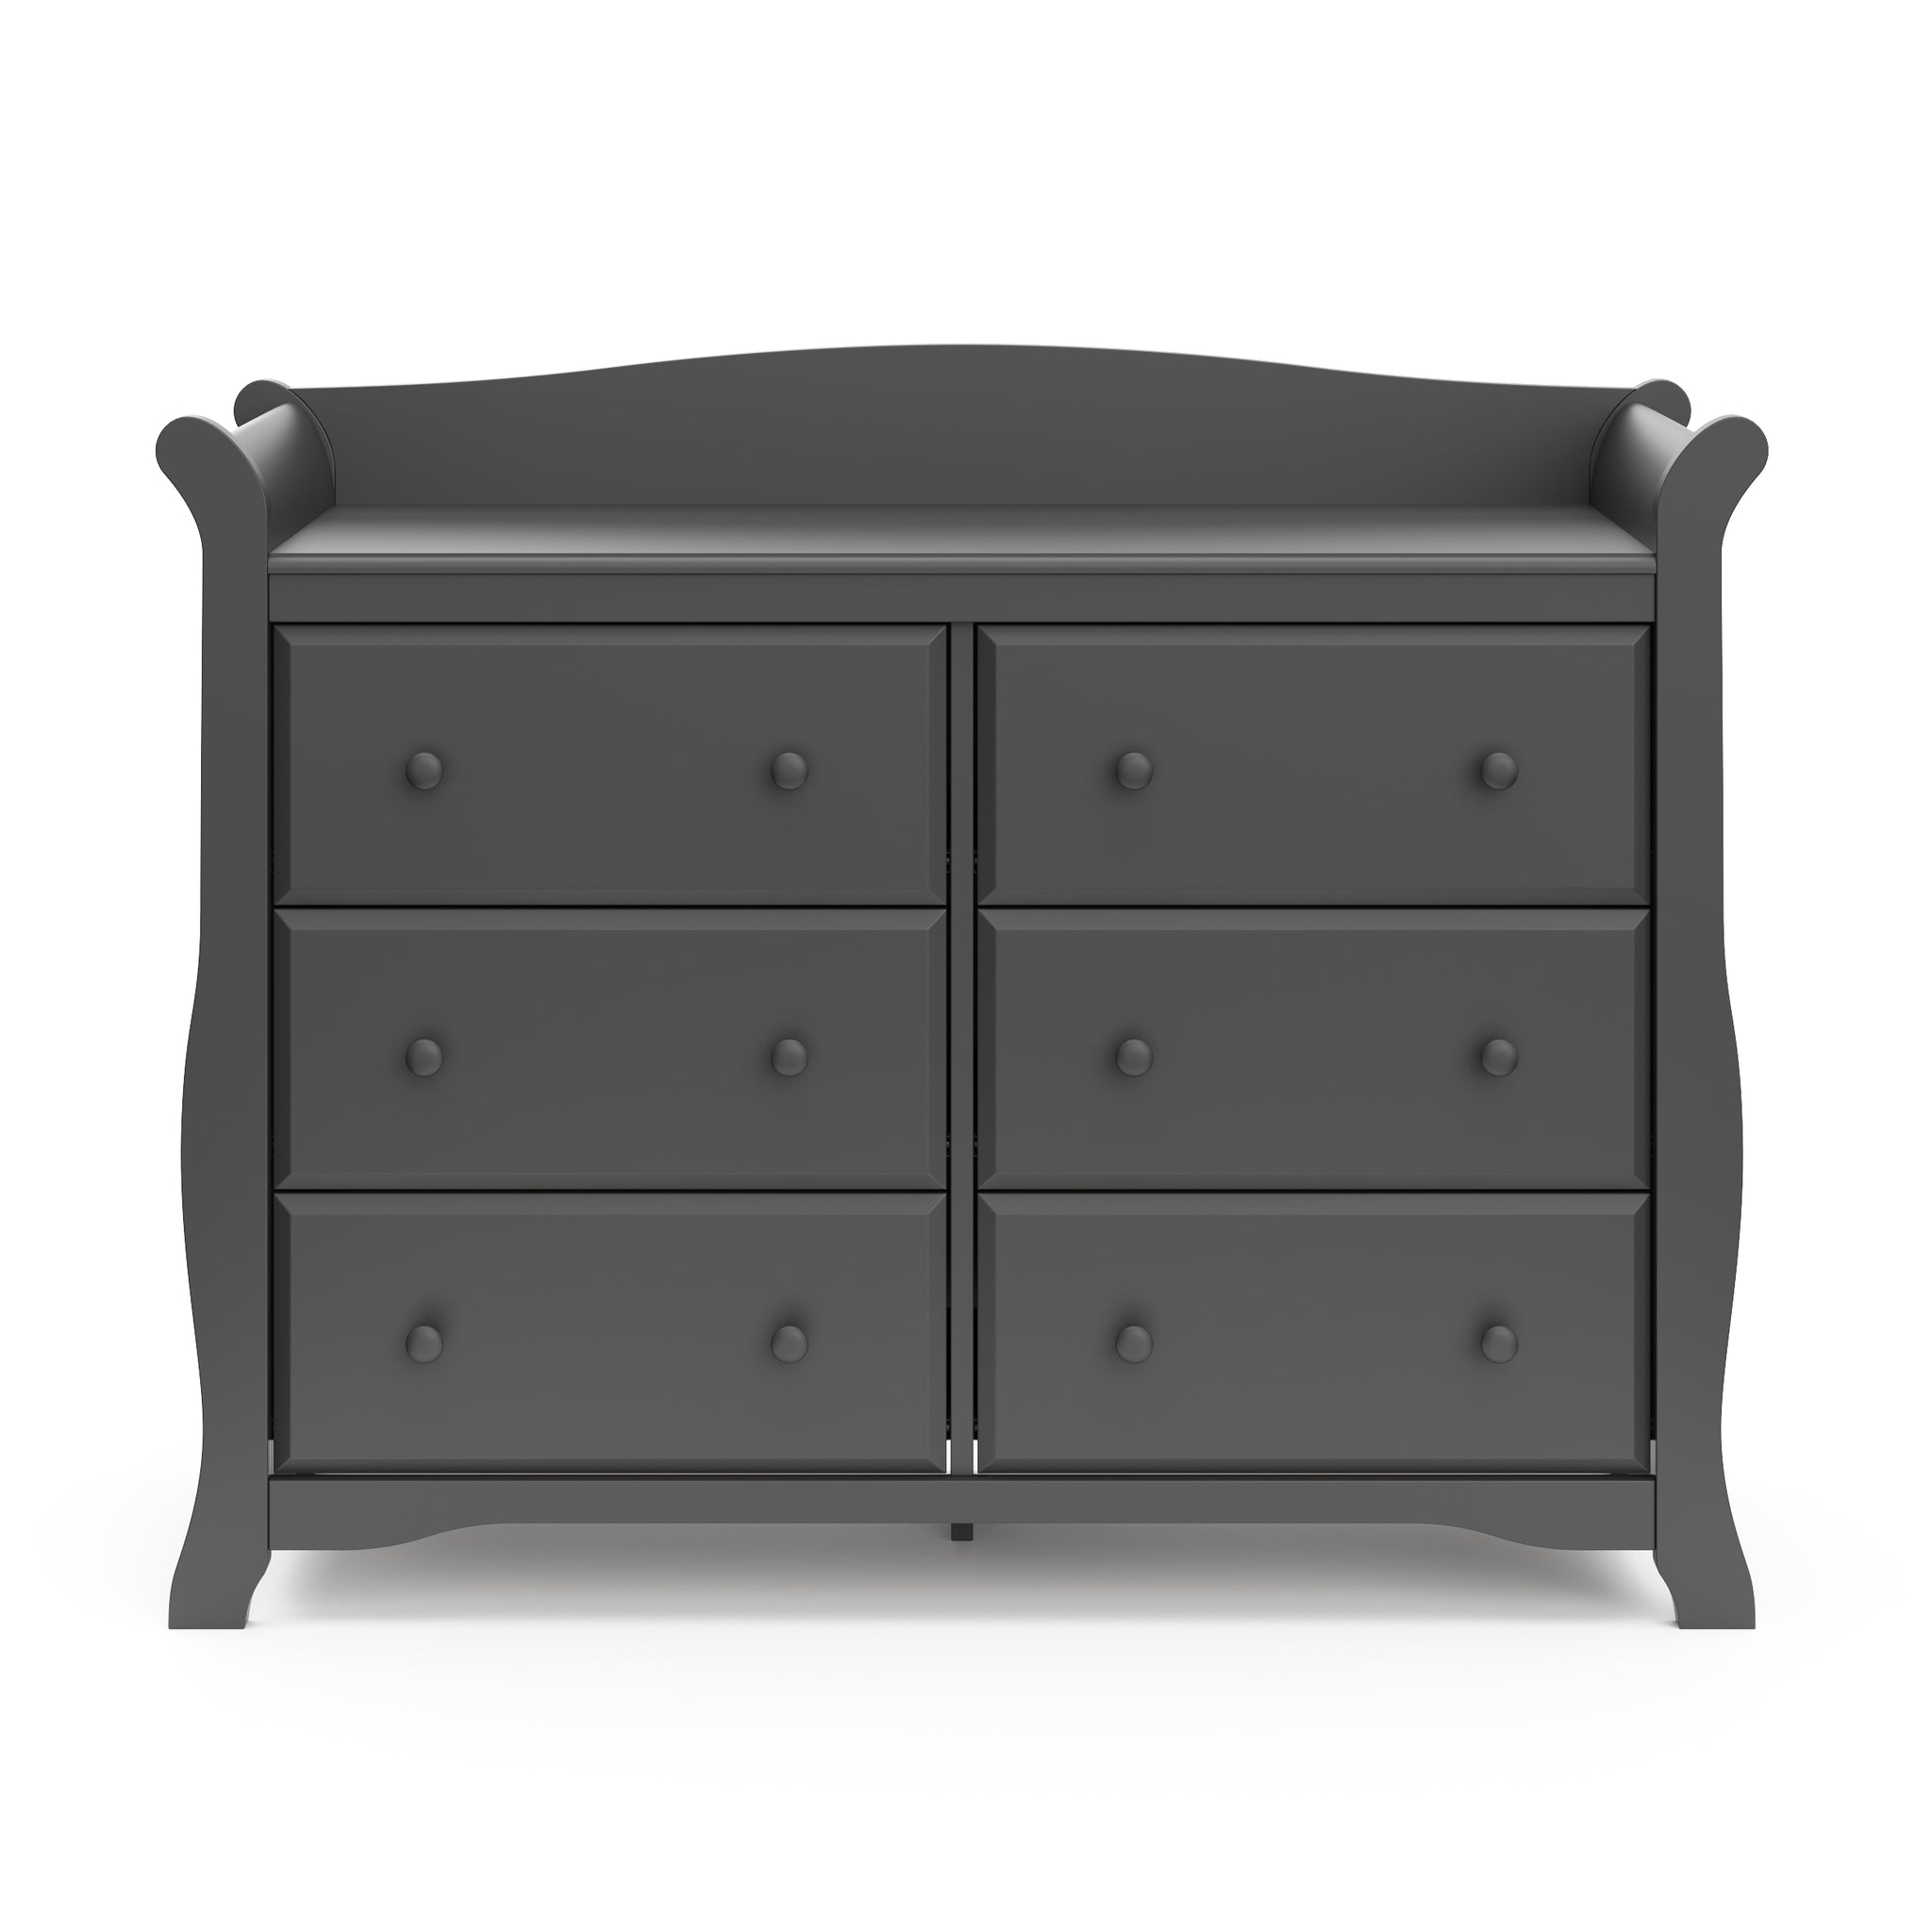 Front view of gray 6 drawer dresser